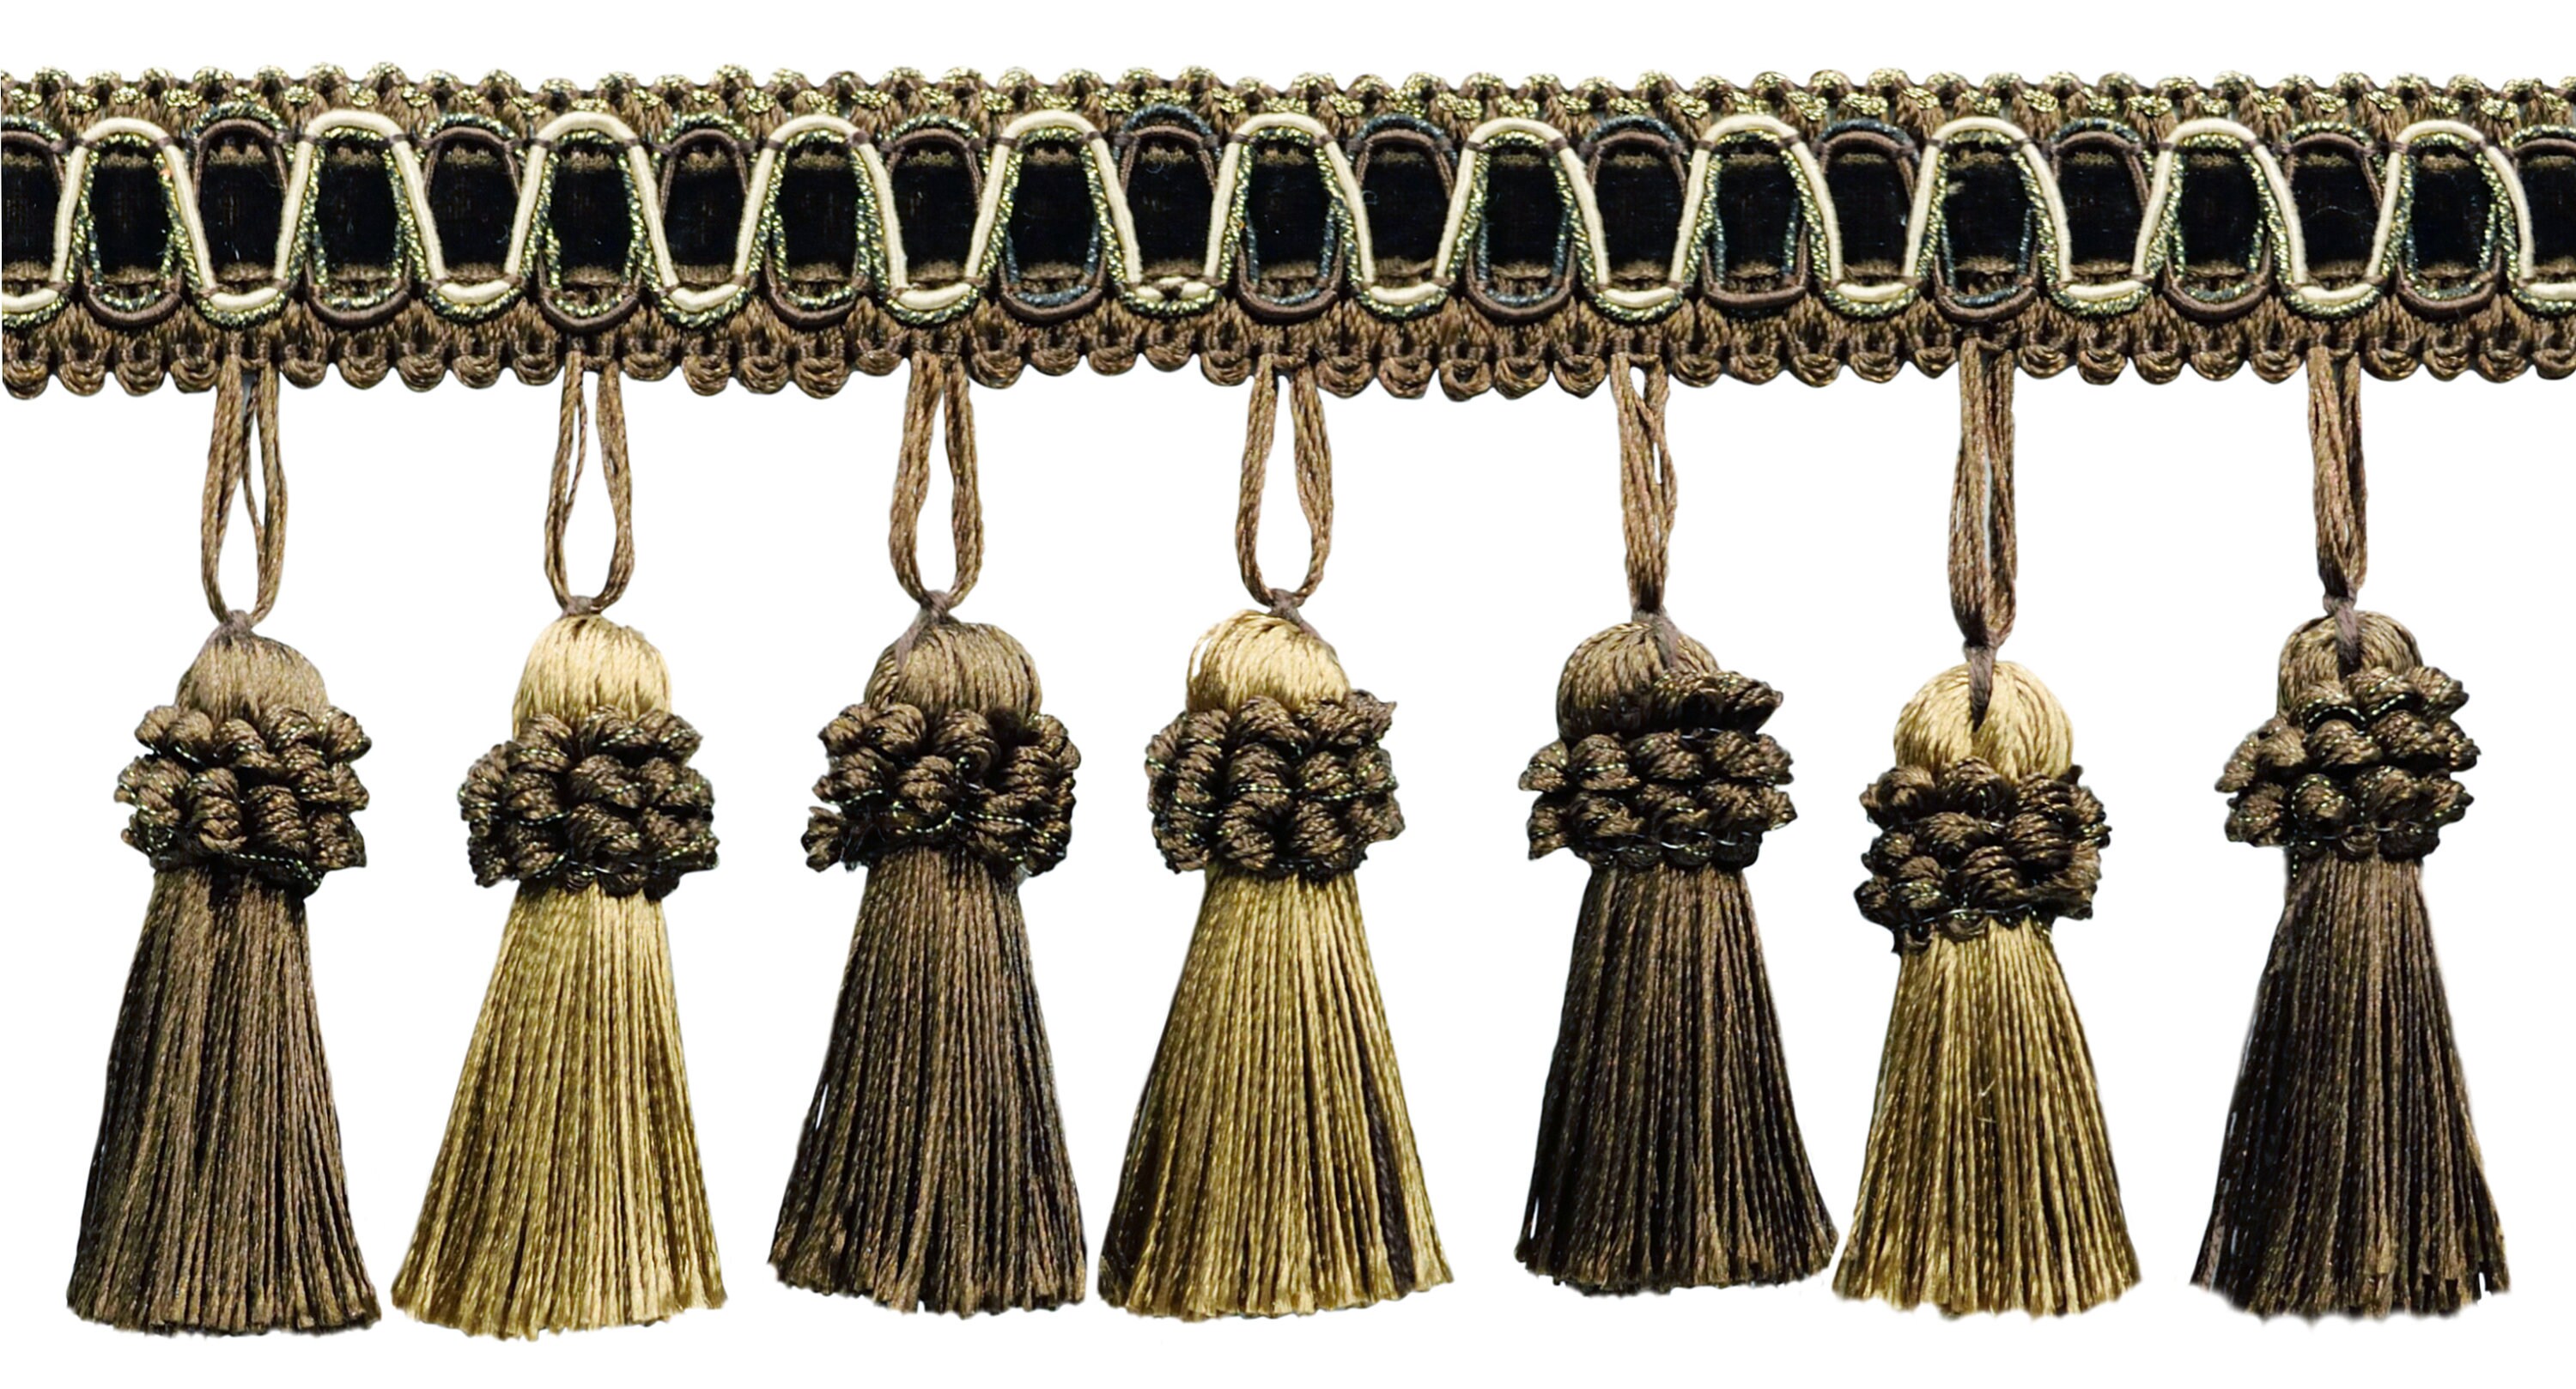 8 (20cm) Long Solid Chainette Fringe Trim (Style# CF08), Antique Gold #C4  (Dark Yellow Gold) Sold by The Yard (36/3 ft/0.9m)